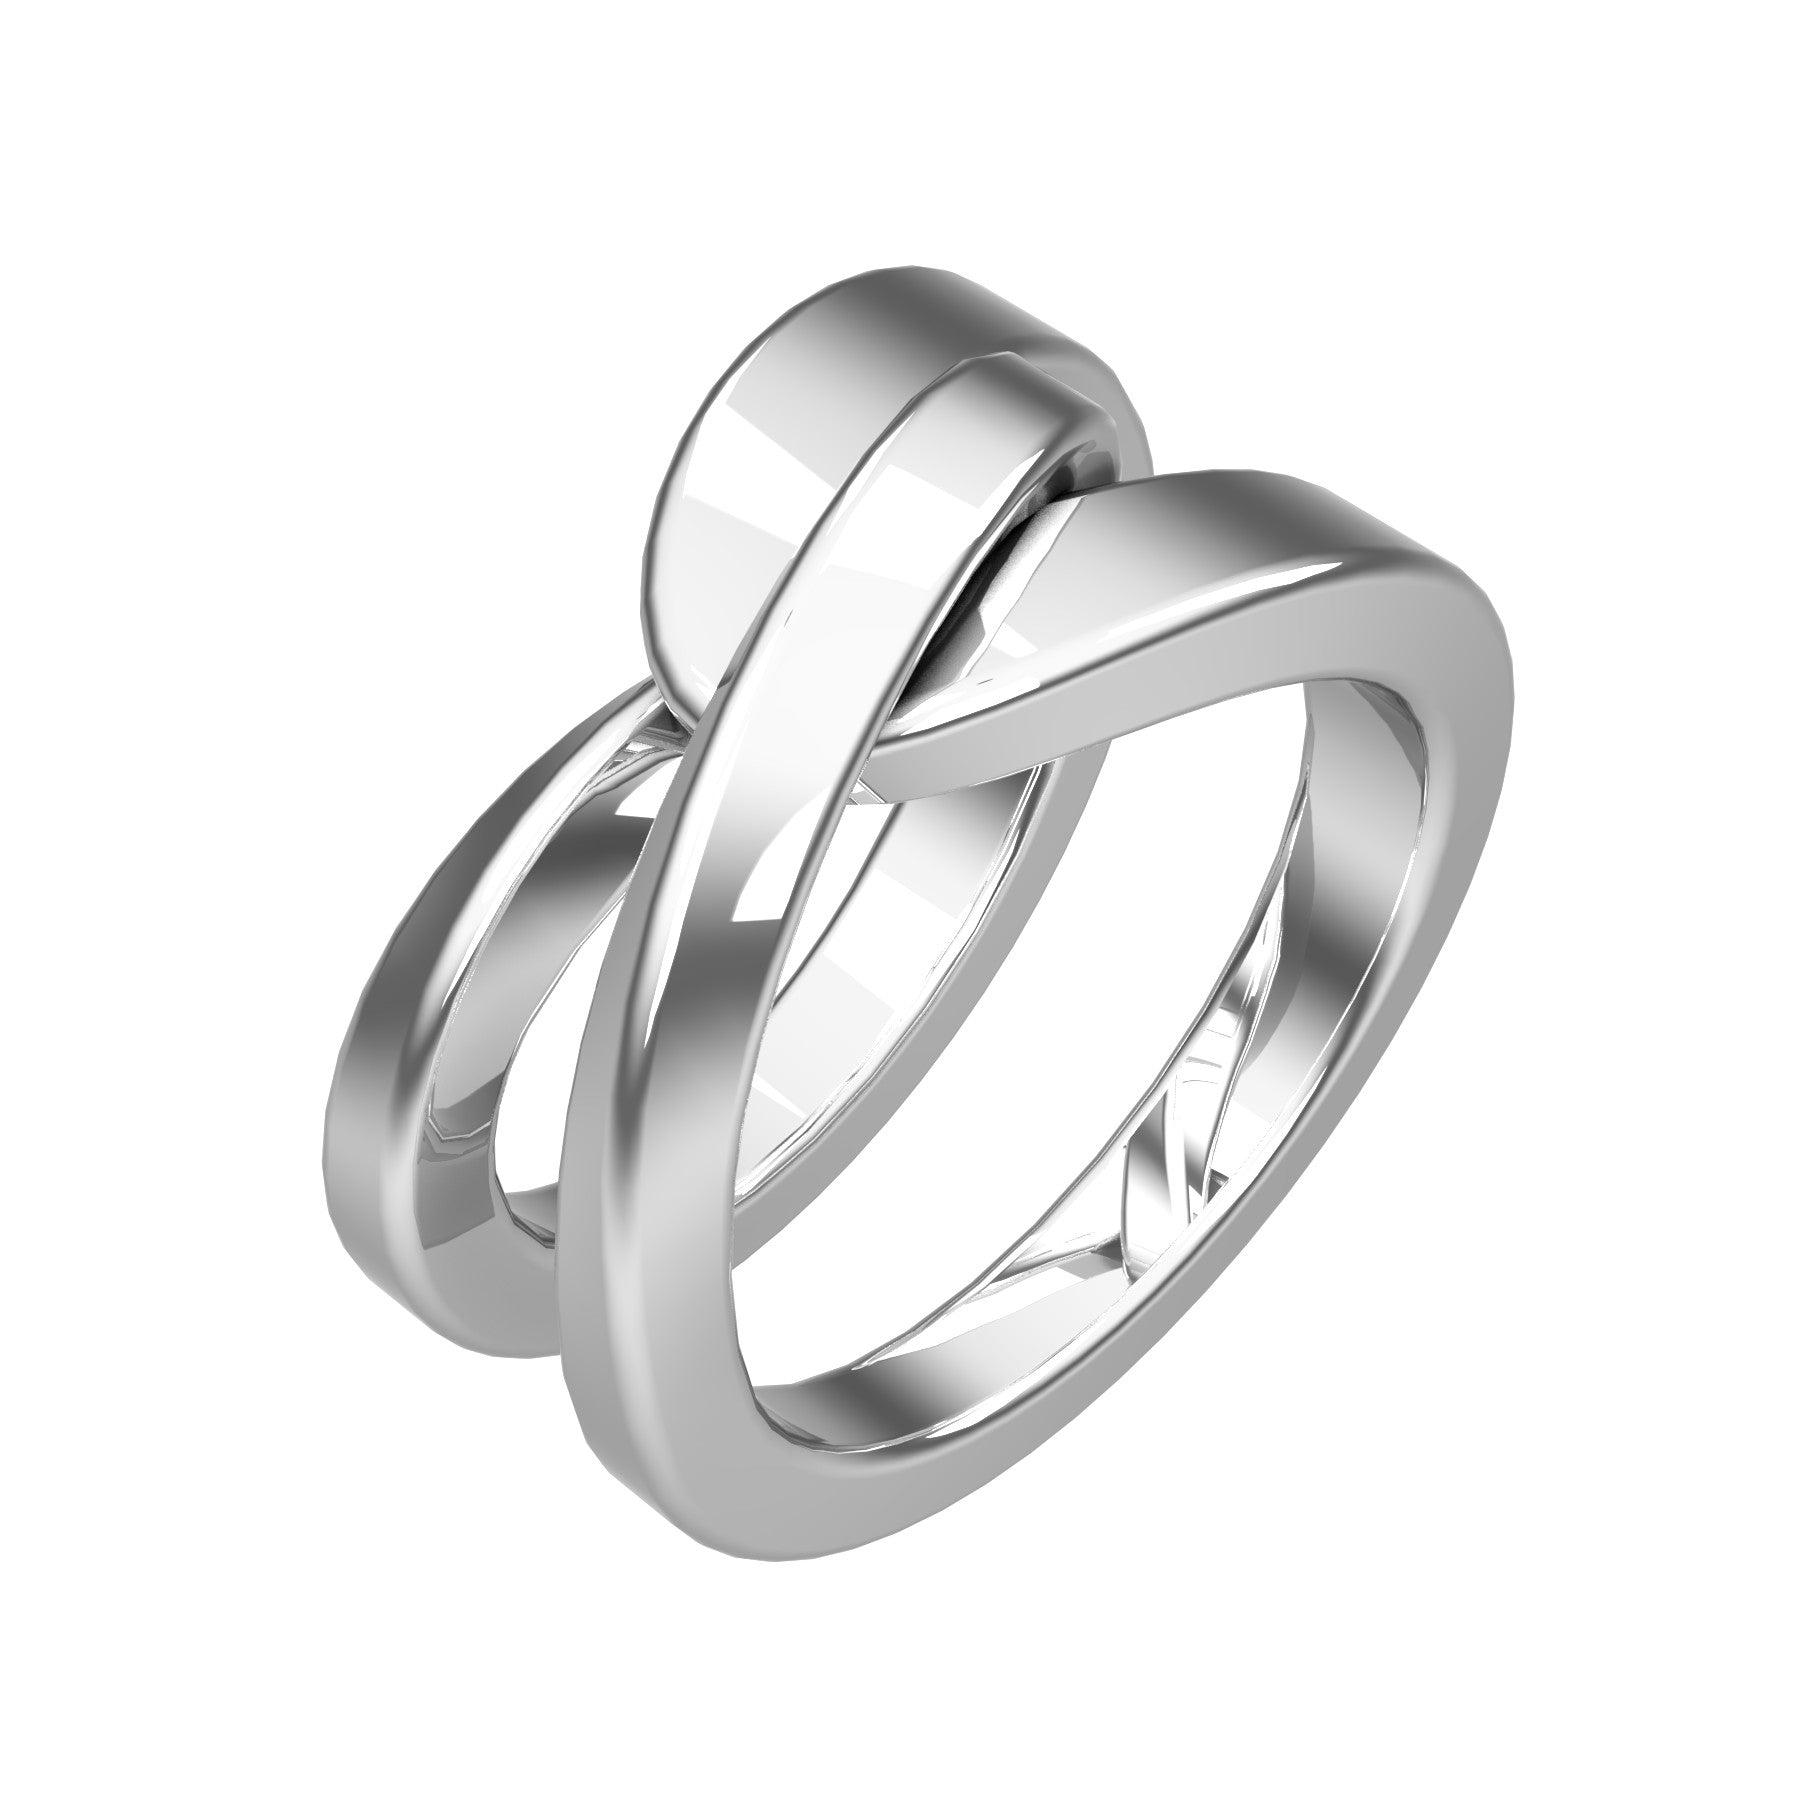 lier ring, 18 k white gold, weight about 14,8 g (0.52 oz), width 12,3 mm max